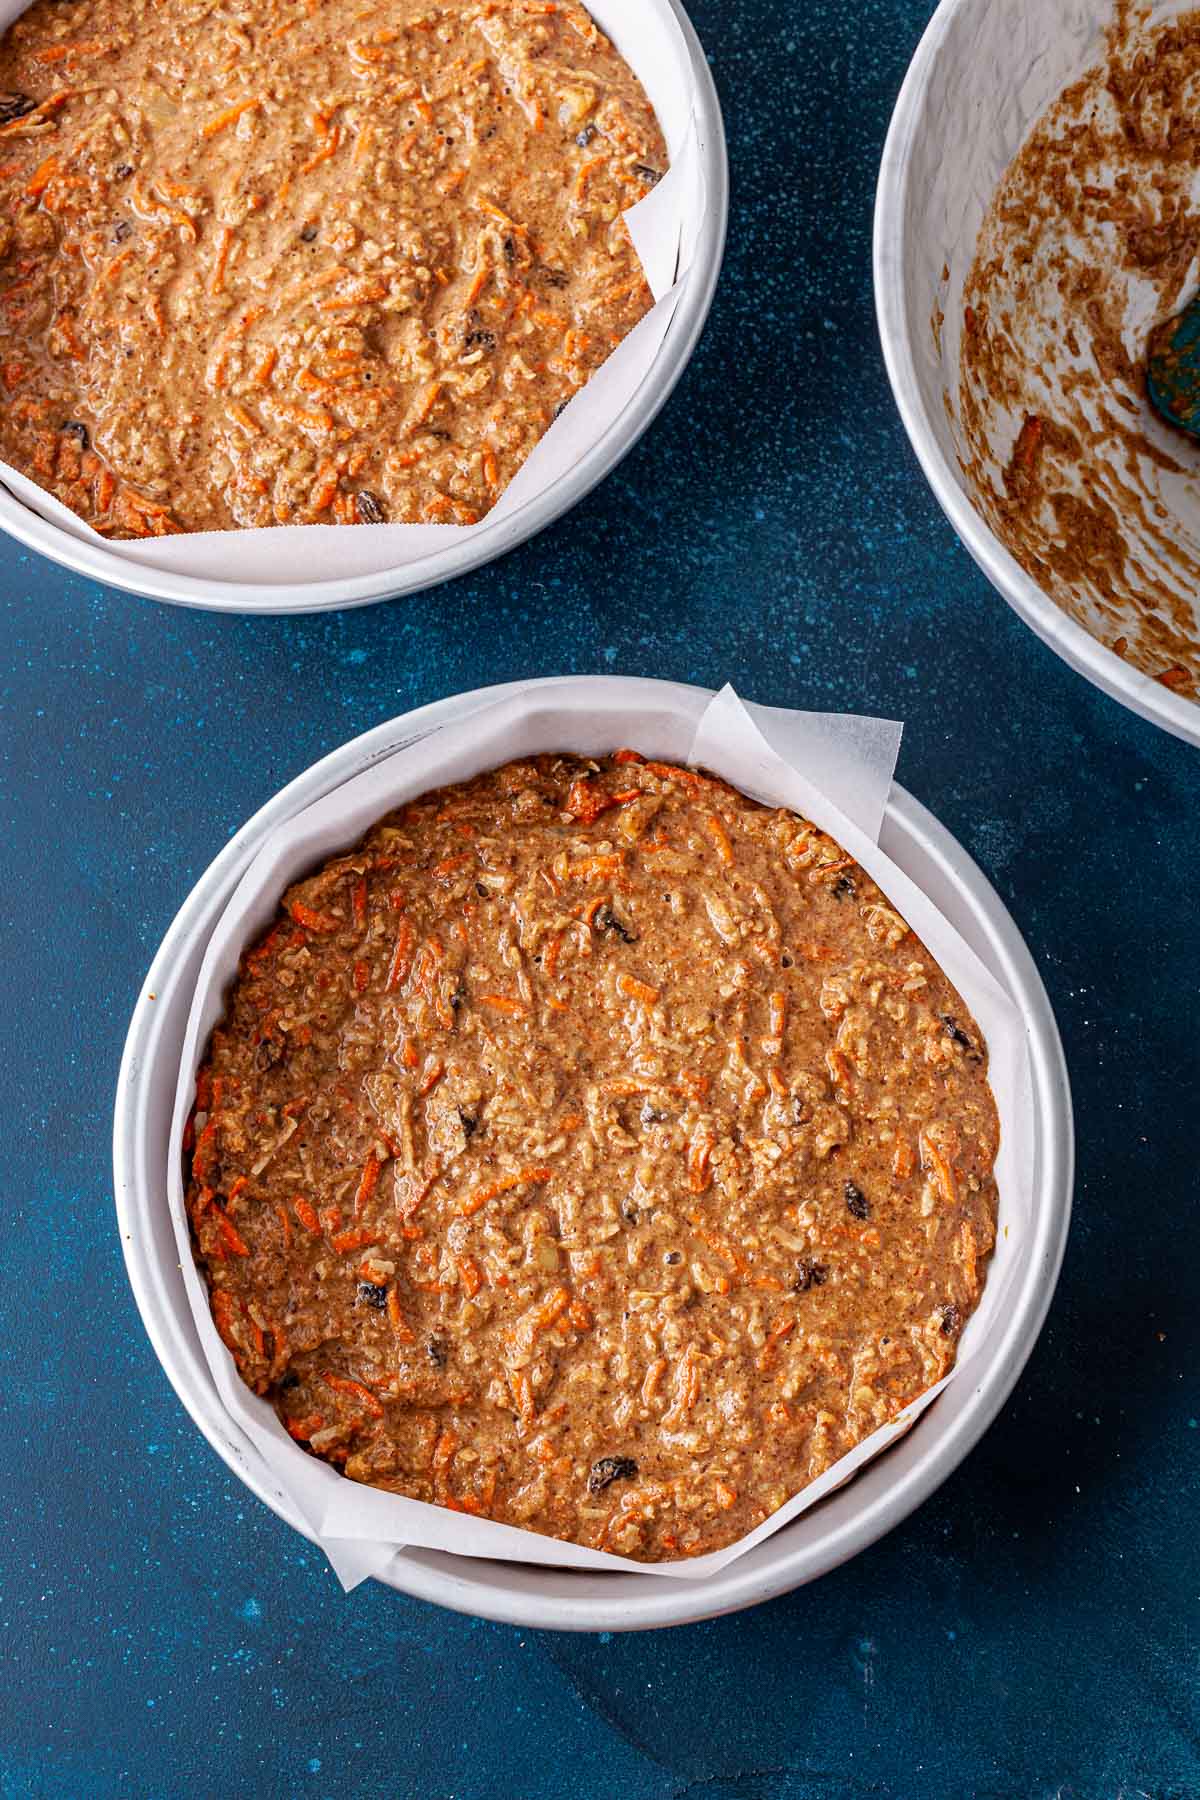 Oil-free vegan carrot cake in round pans before being baked.